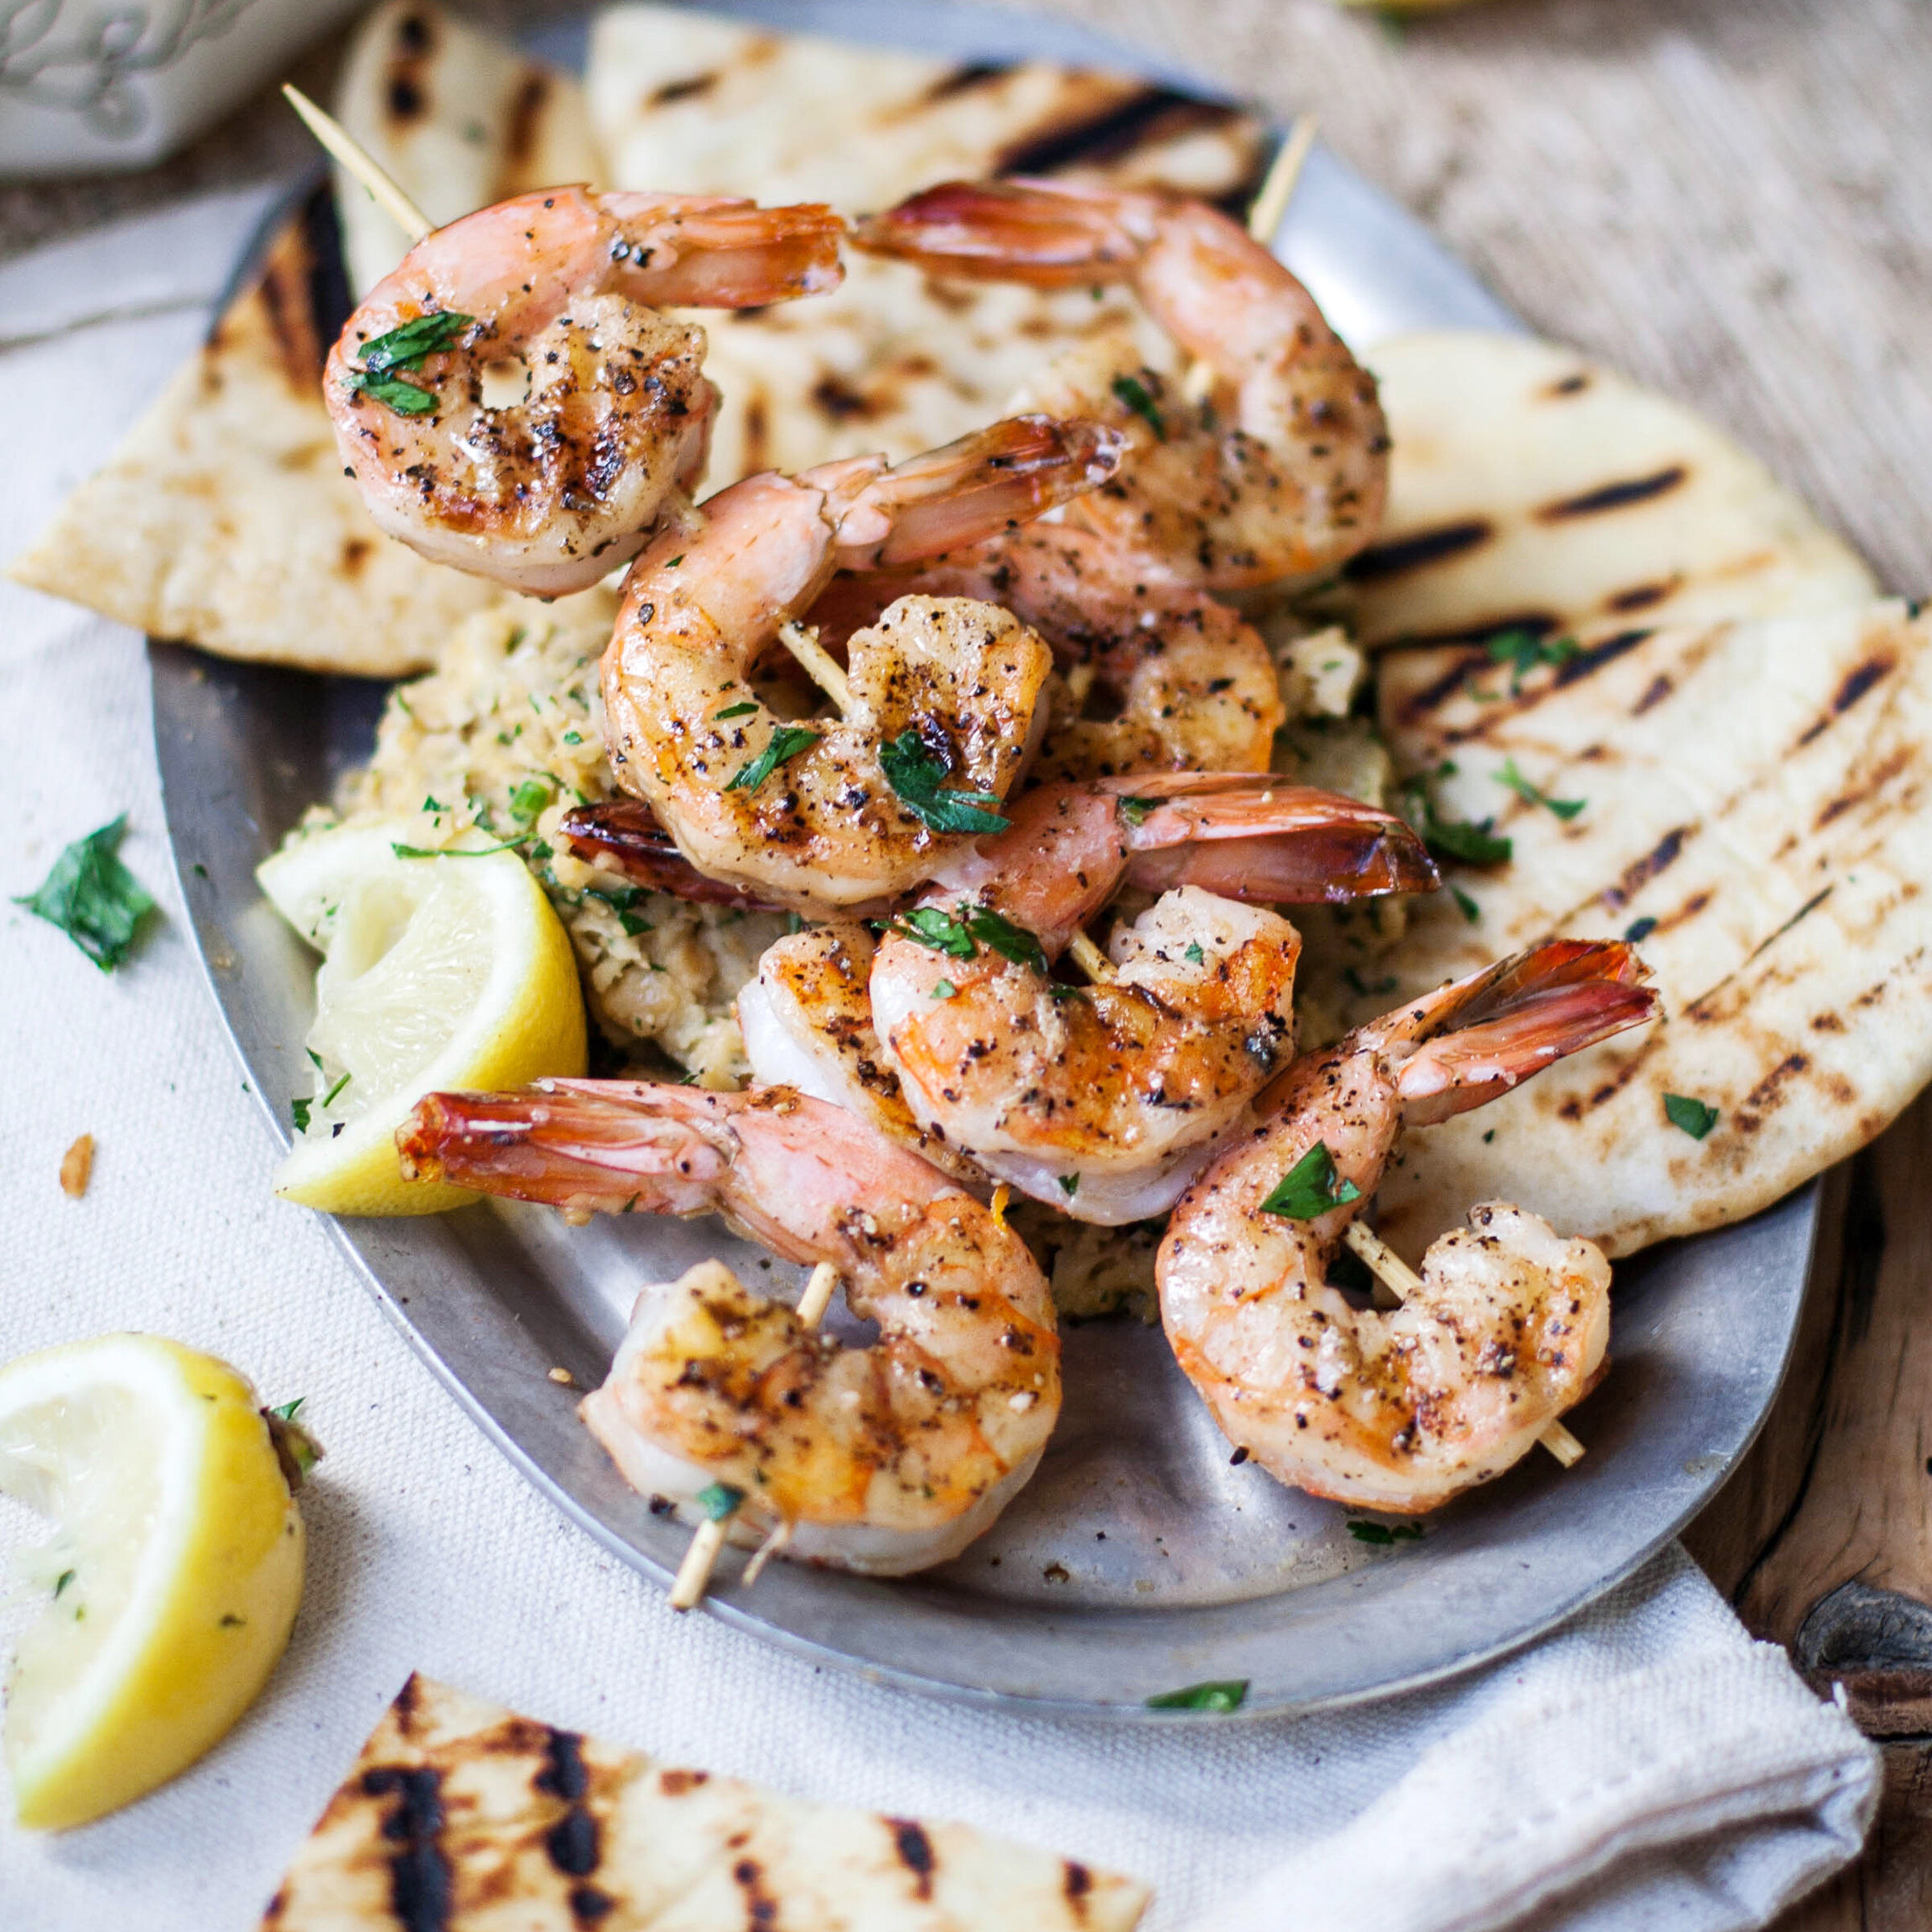 2013-r-xl-grilled-shrimp-and-pitas-with-chickpea-puree.jpg